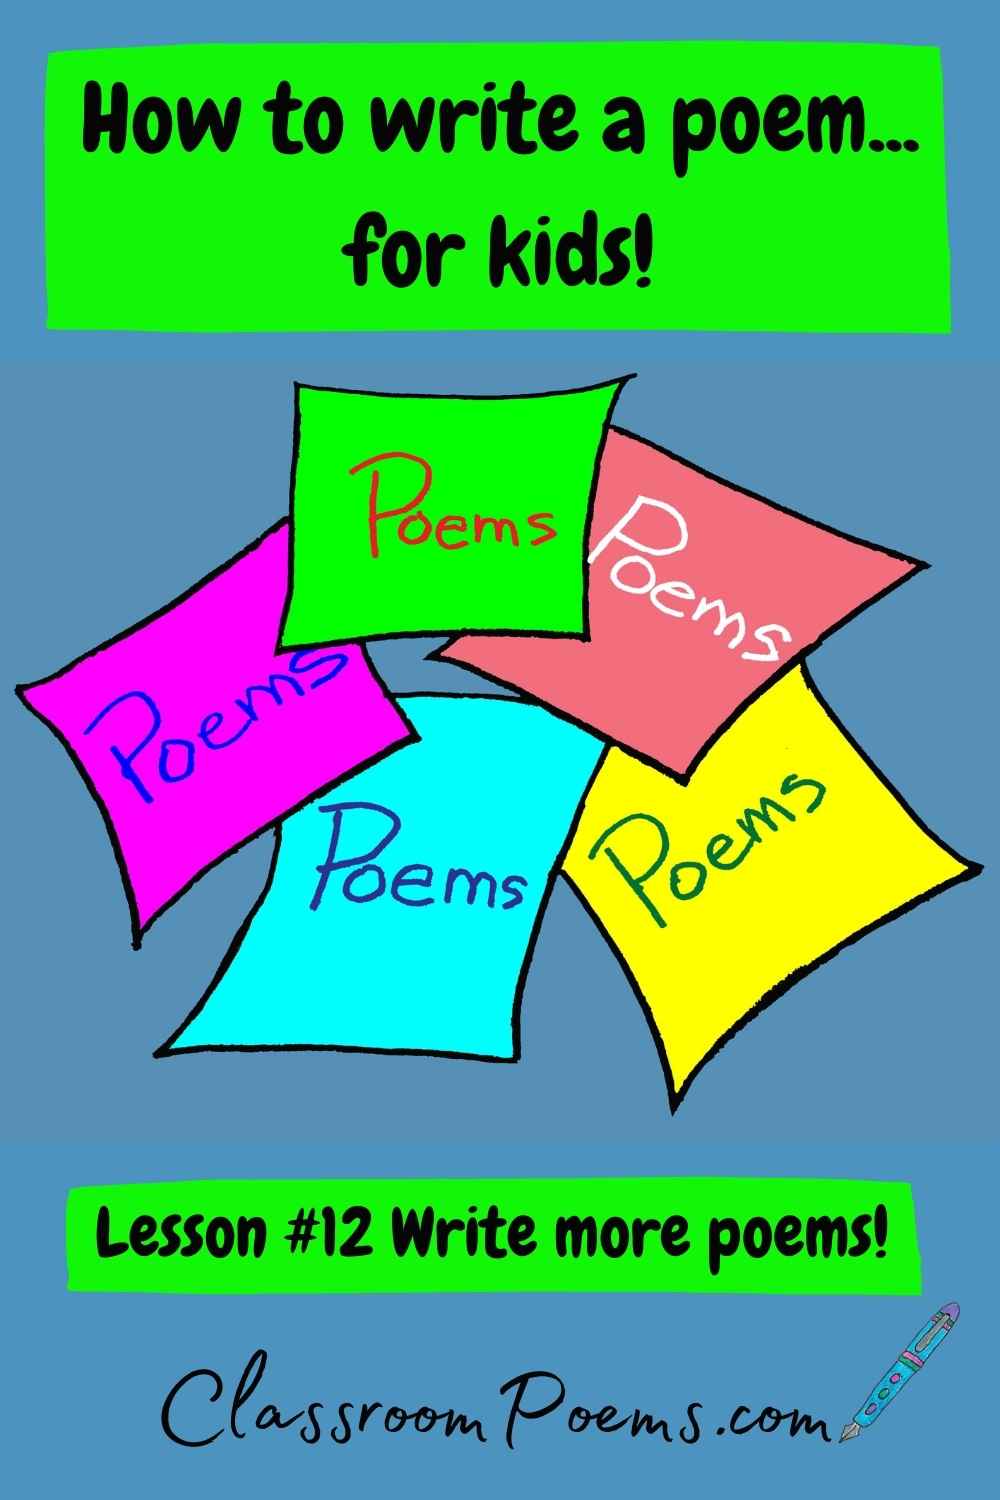 How to Write a Poem: Poetry Lessons